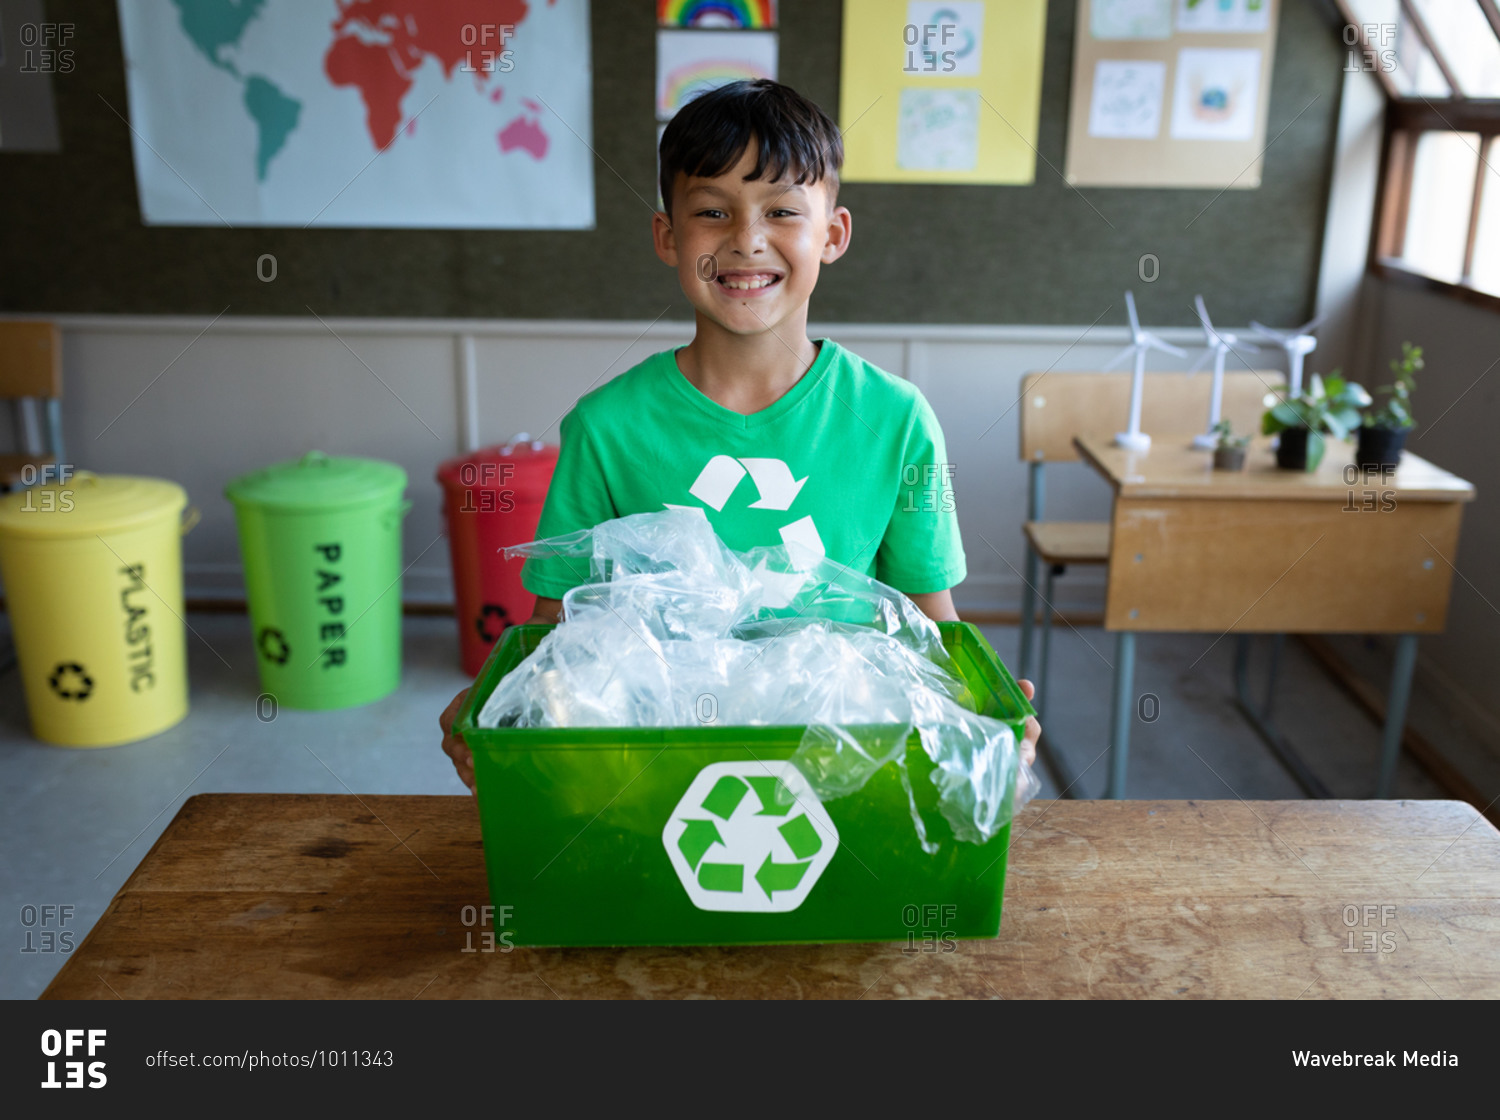 Portrait of a mixed race boy holding a recycle container in class at school. Primary education social distancing health safety during Covid19 Coronavirus pandemic.